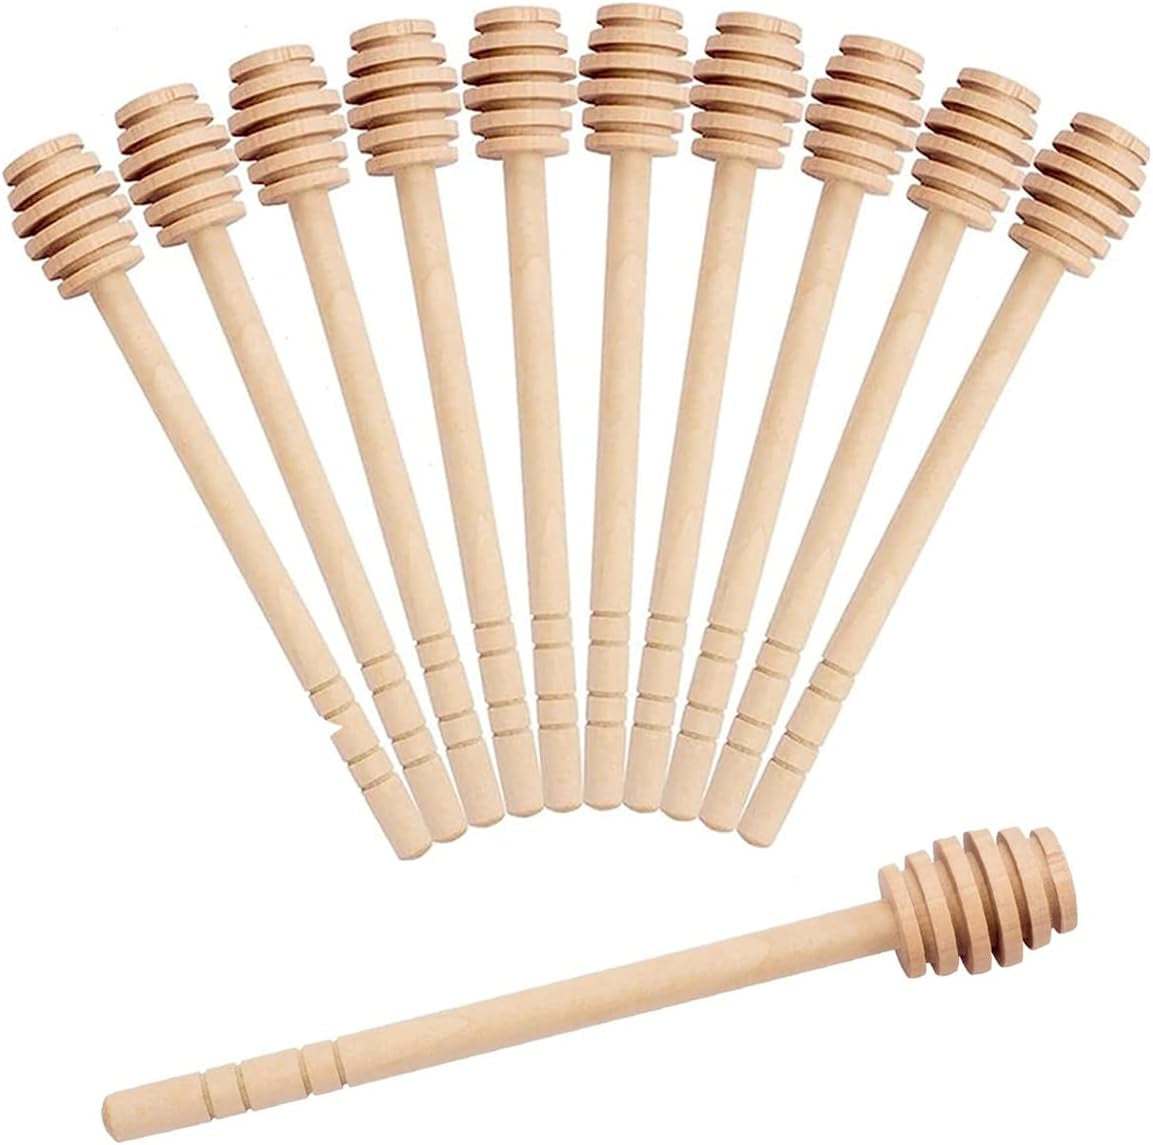 50PC Wooden Honey Dipper - 6 Inch Honey Stirrer Stick for Jar Dispense and Drizzle Honey